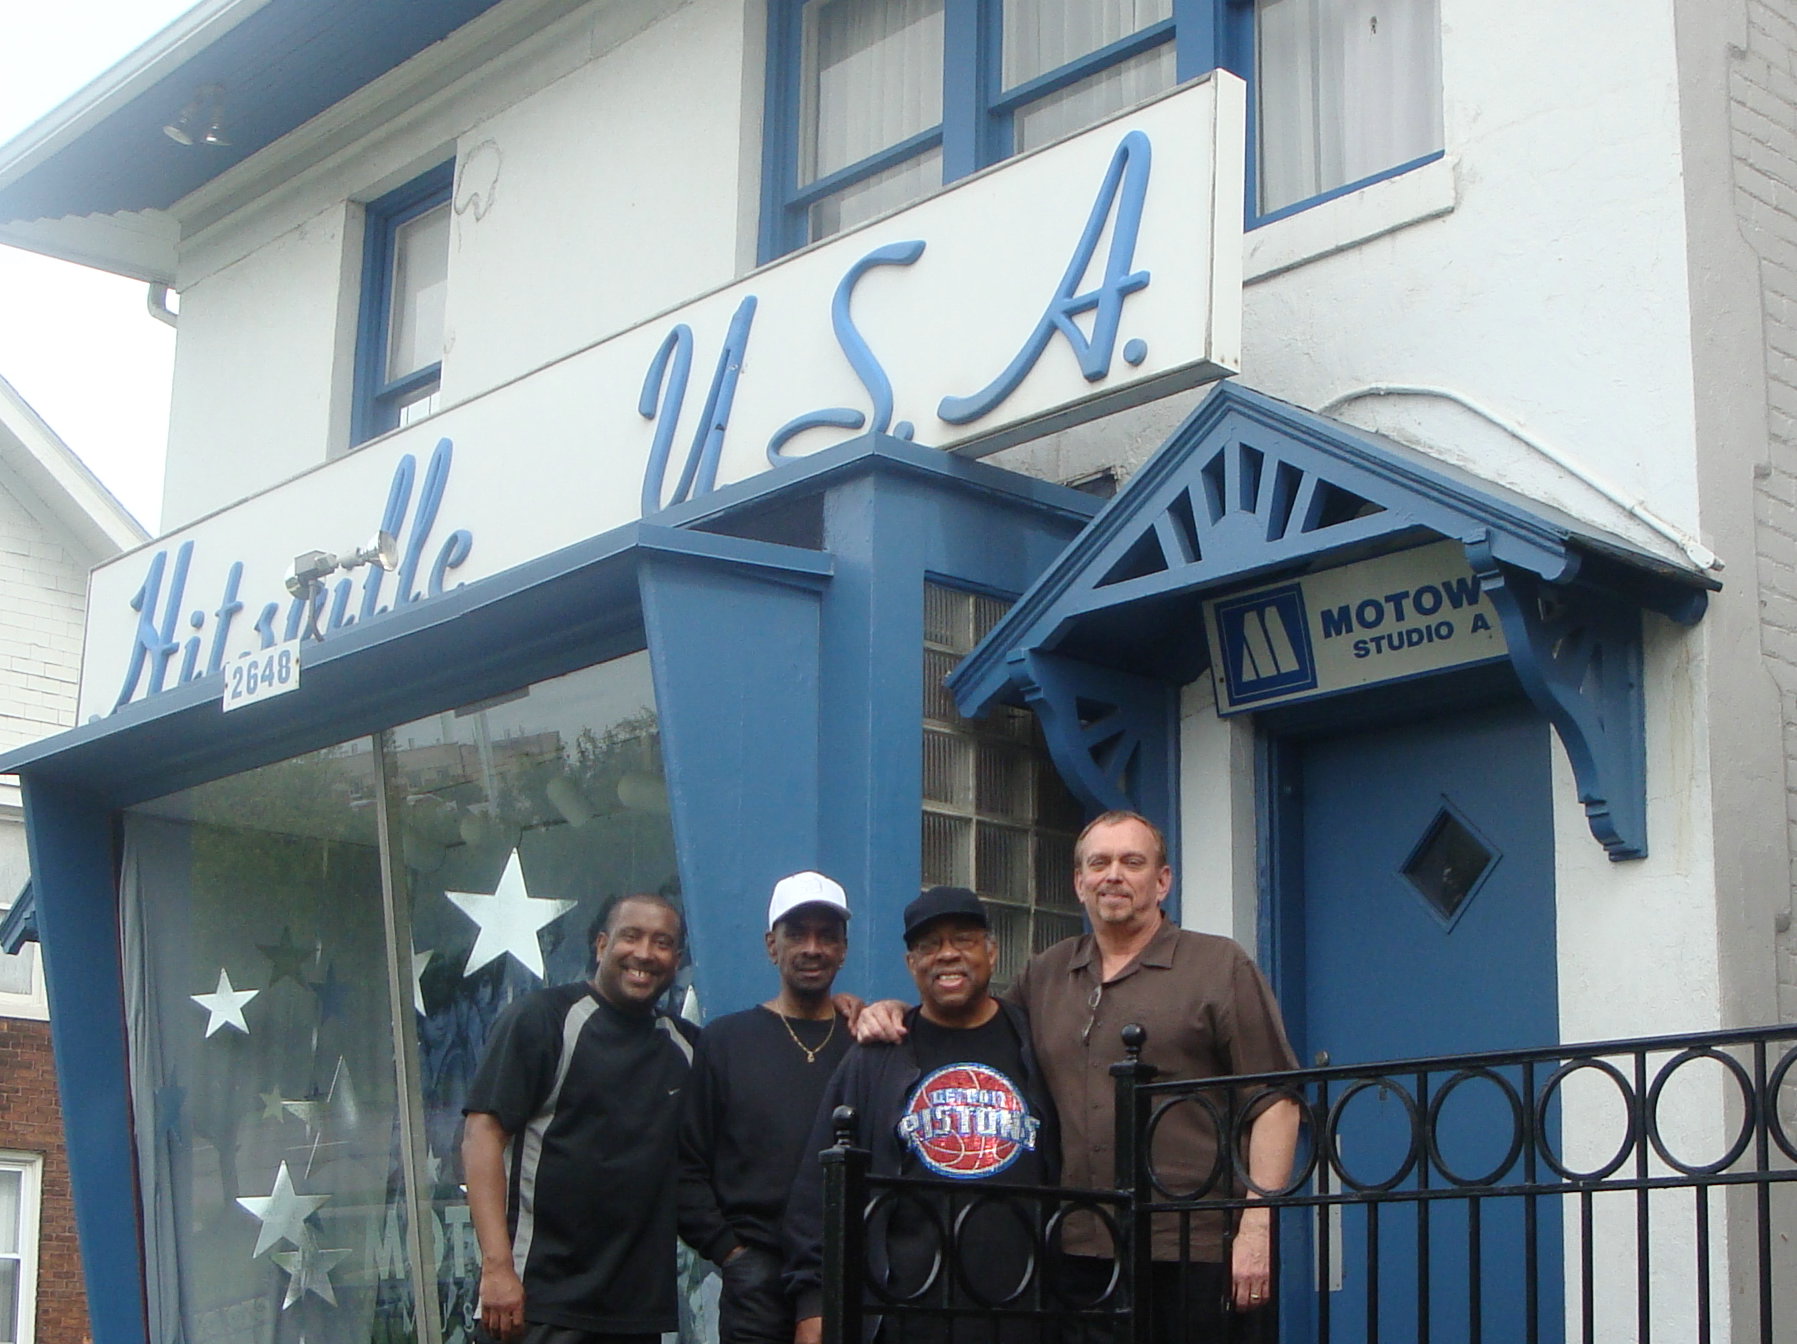 Actor-Director Anthony Hornus, right, (Renovation, Locked In a Room), at Motown's Hitsville USA in Detroit with, from left, Emerson Rogers Jr., Joe Billingslea, founding member of The Contours, most famous from their song 